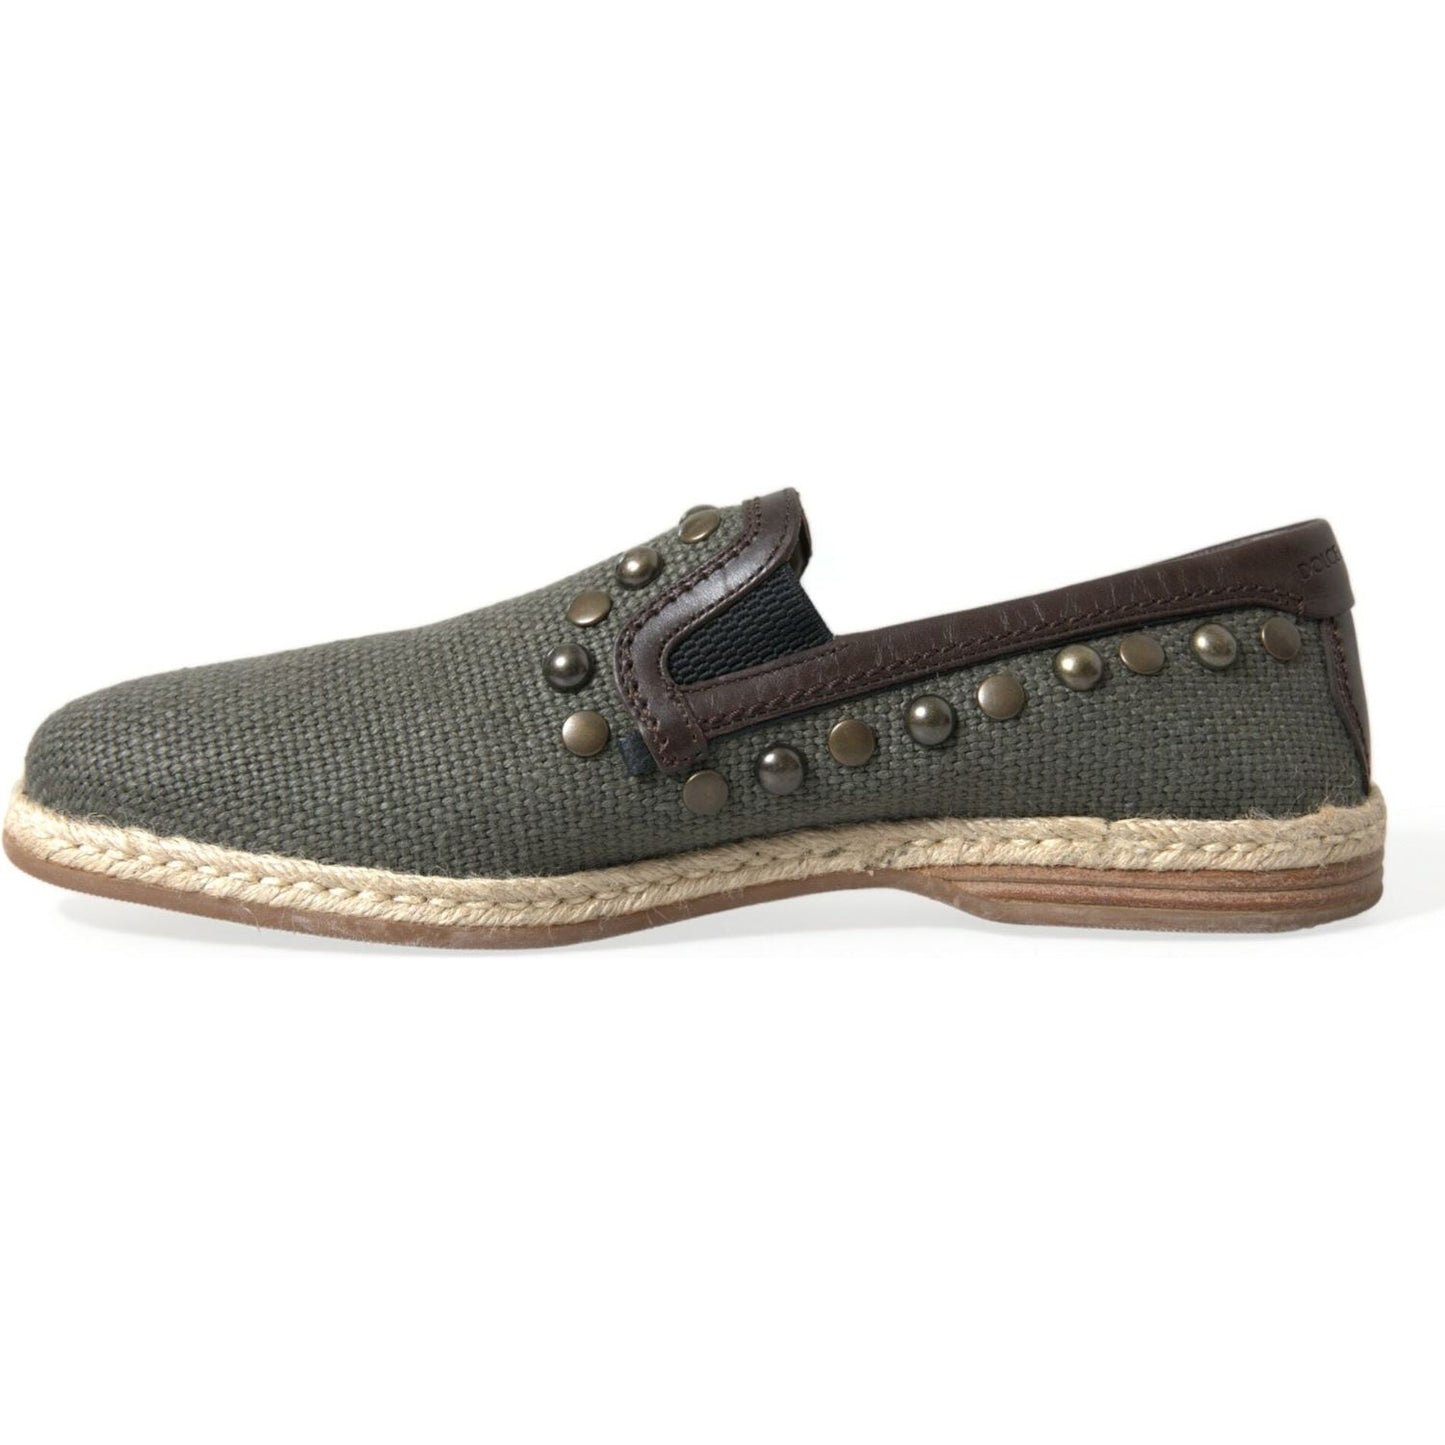 Dolce & Gabbana Studded Canvas Loafer Slipper Shoes gray-linen-leather-studded-loafers-shoes